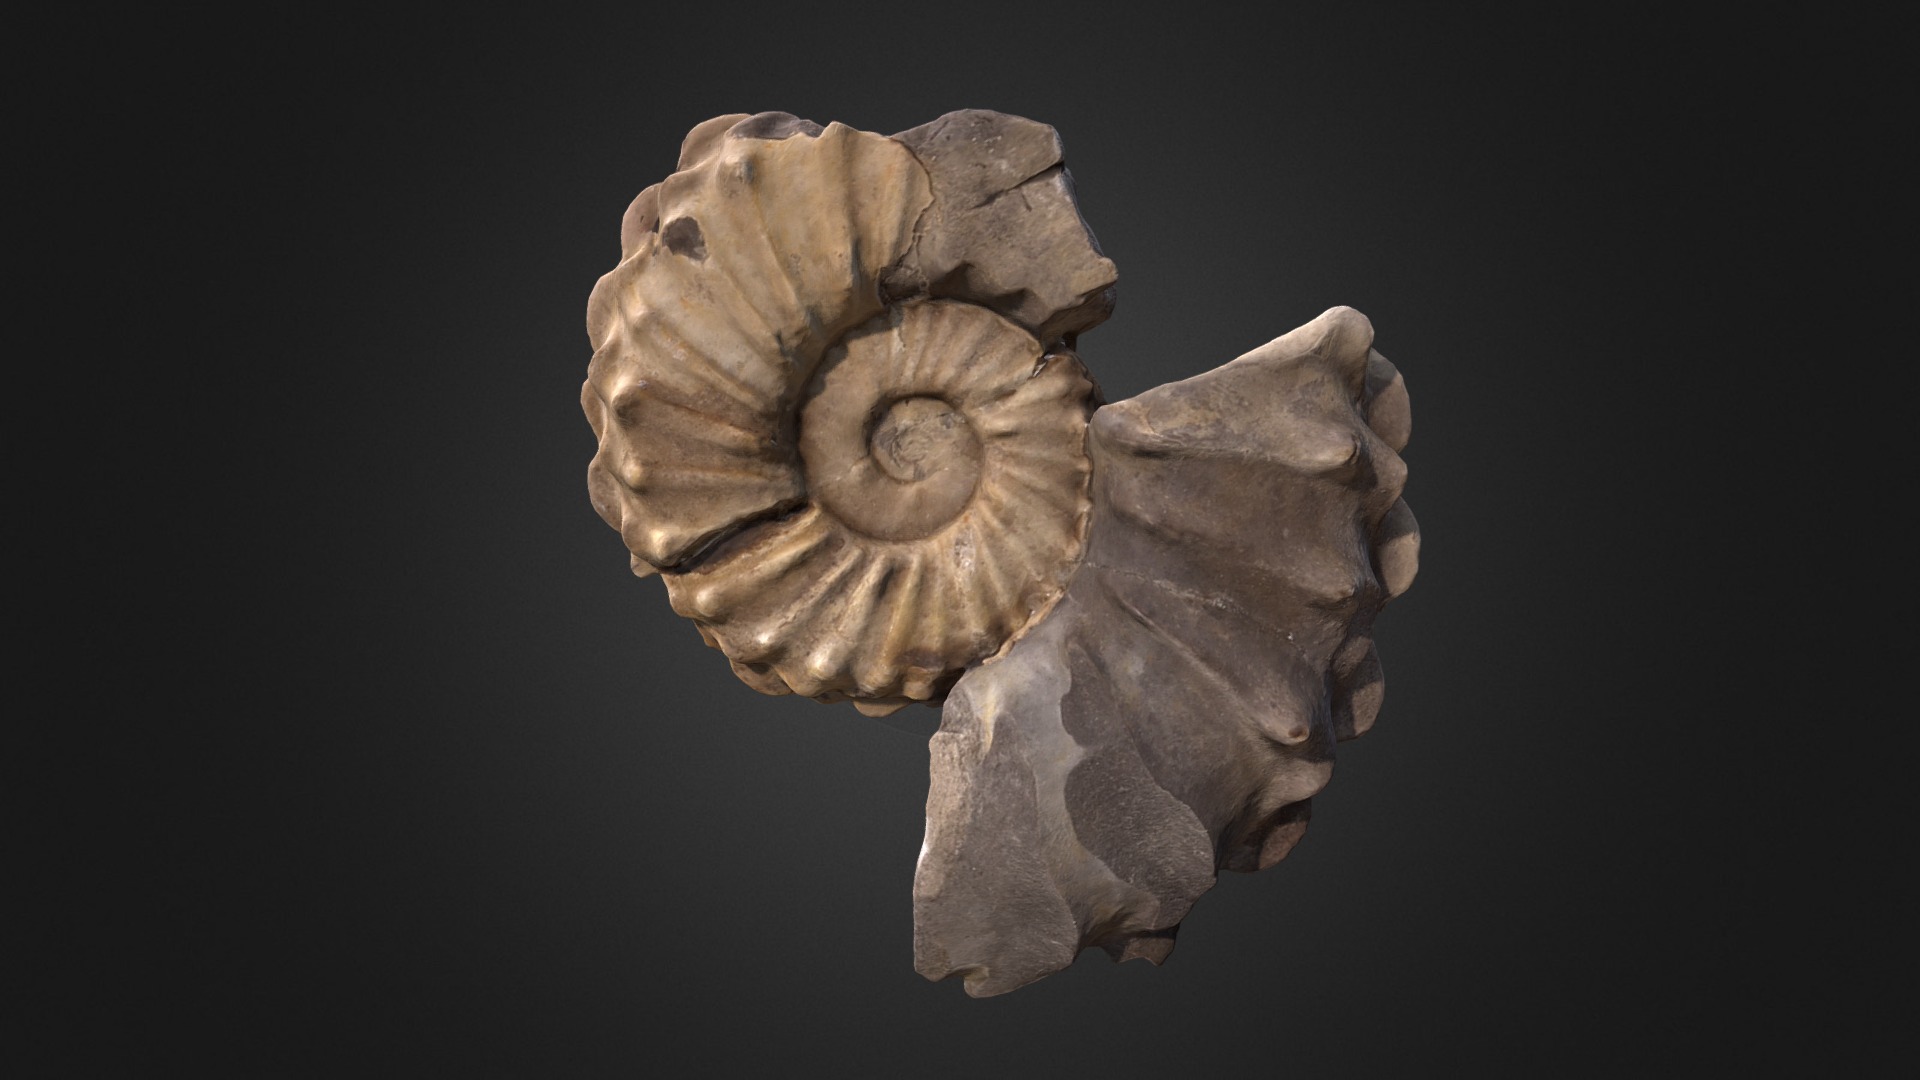 3D model Collignoniceras sp.  D21792 - This is a 3D model of the Collignoniceras sp.  D21792. The 3D model is about a stone carving of a dragon.